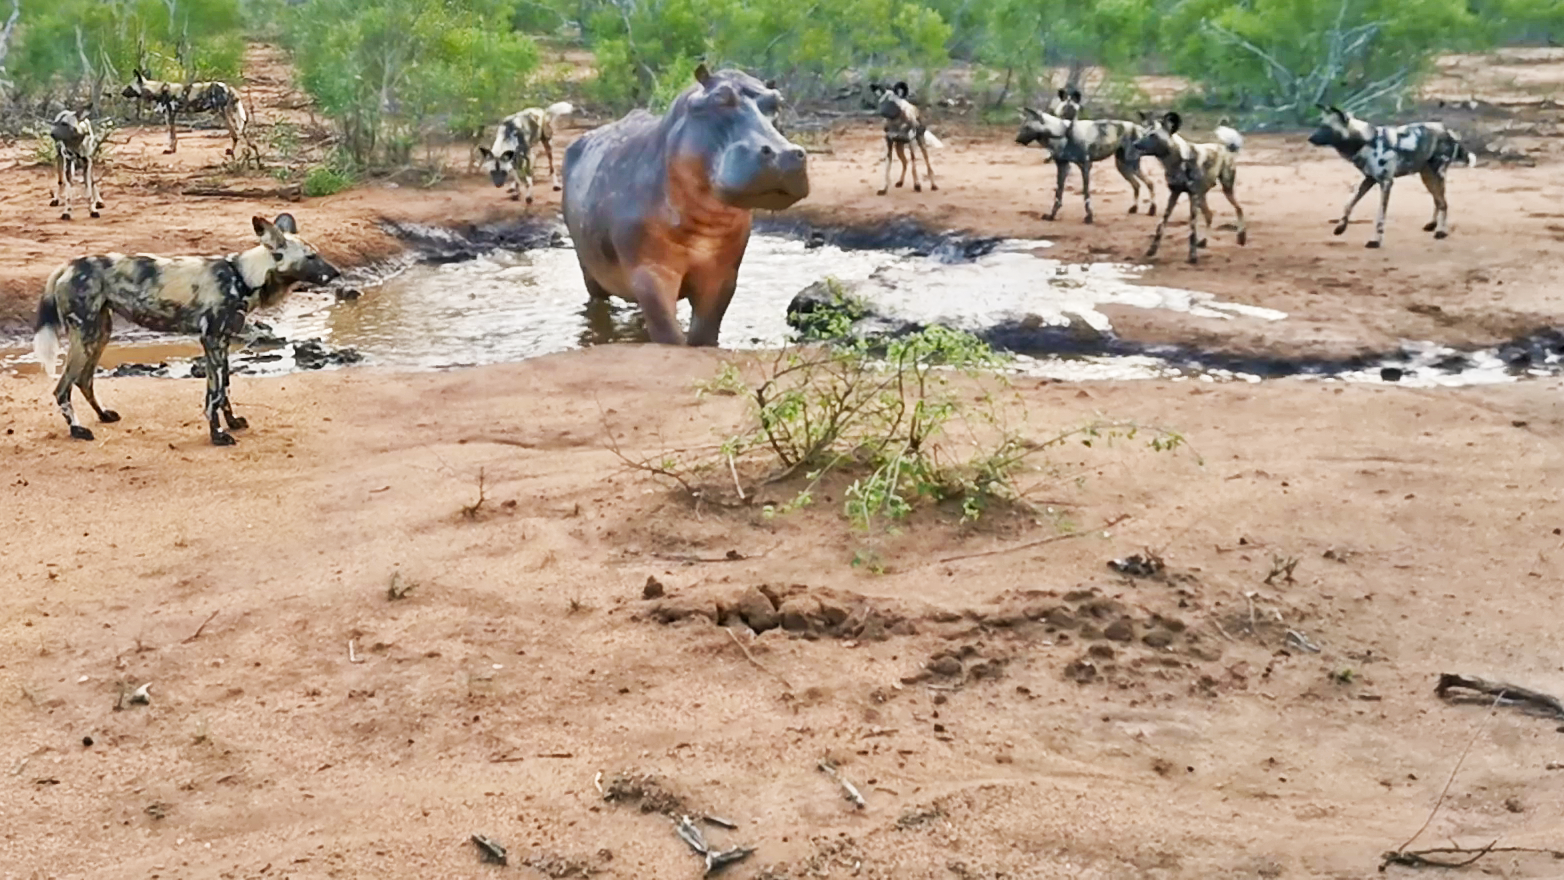 Hippo Surrounded by Wild Dogs